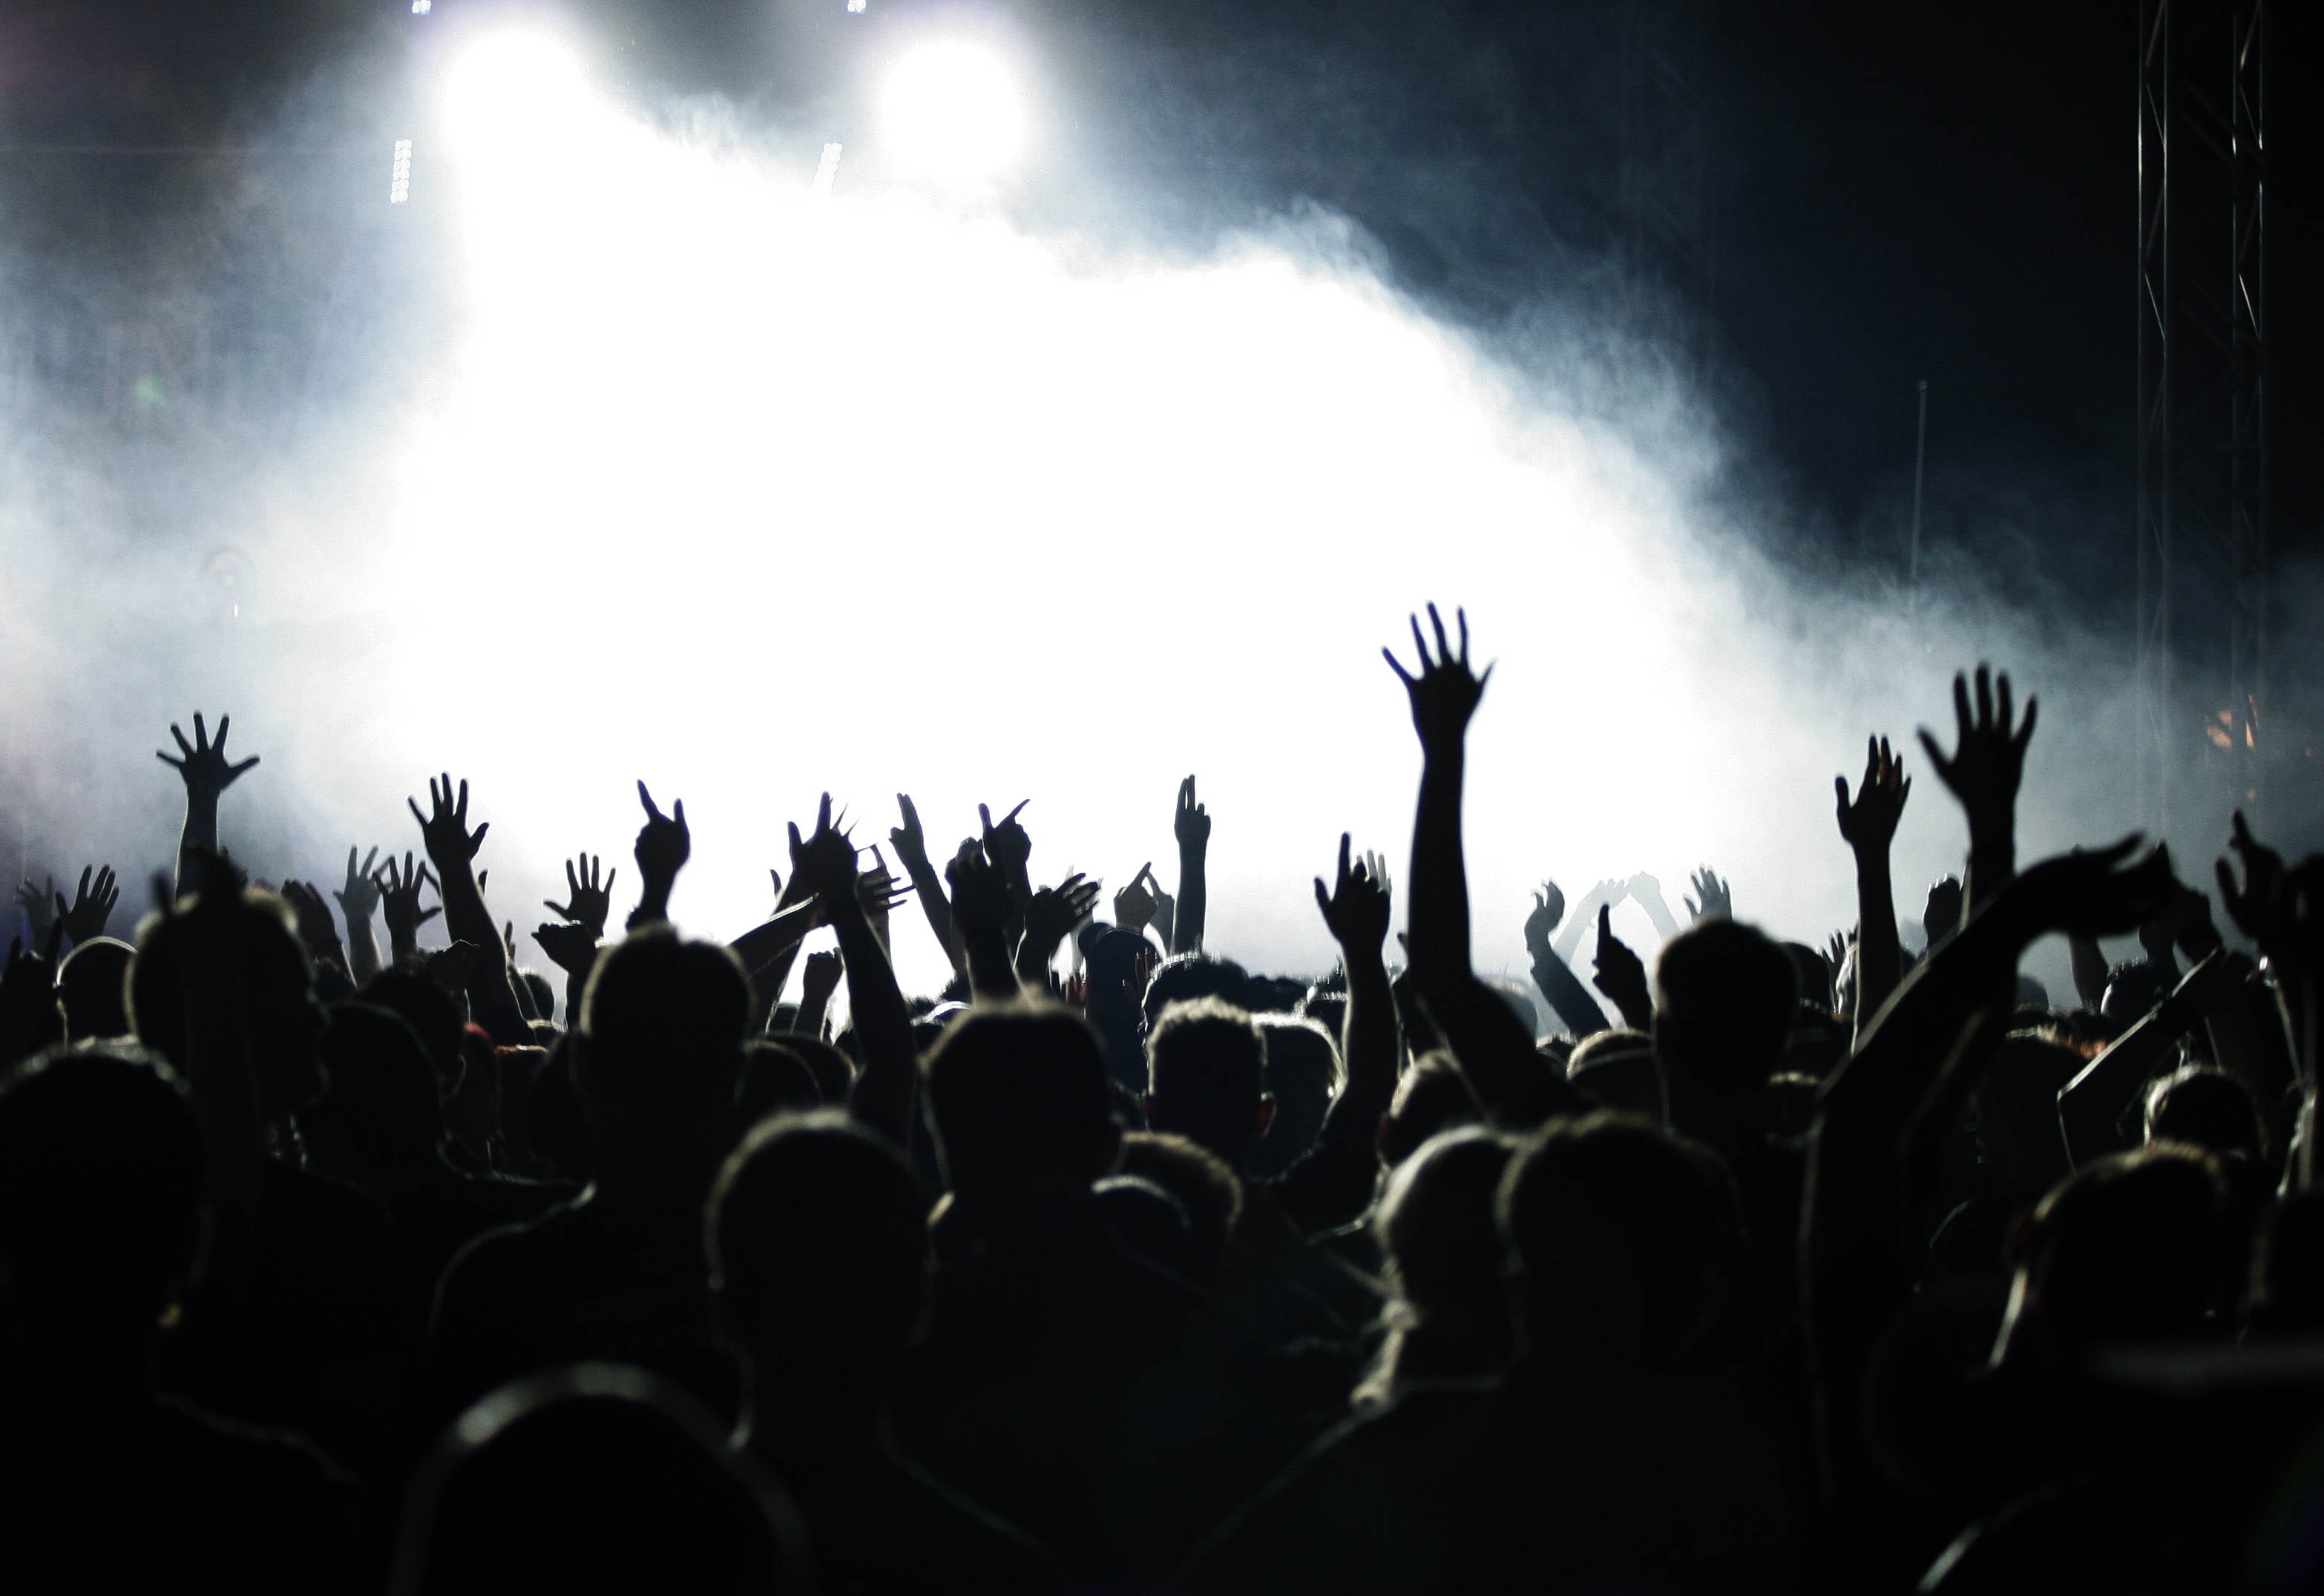 Concert: Group of people at event, Band playing music, Music bringing people together. 3140x2160 HD Wallpaper.